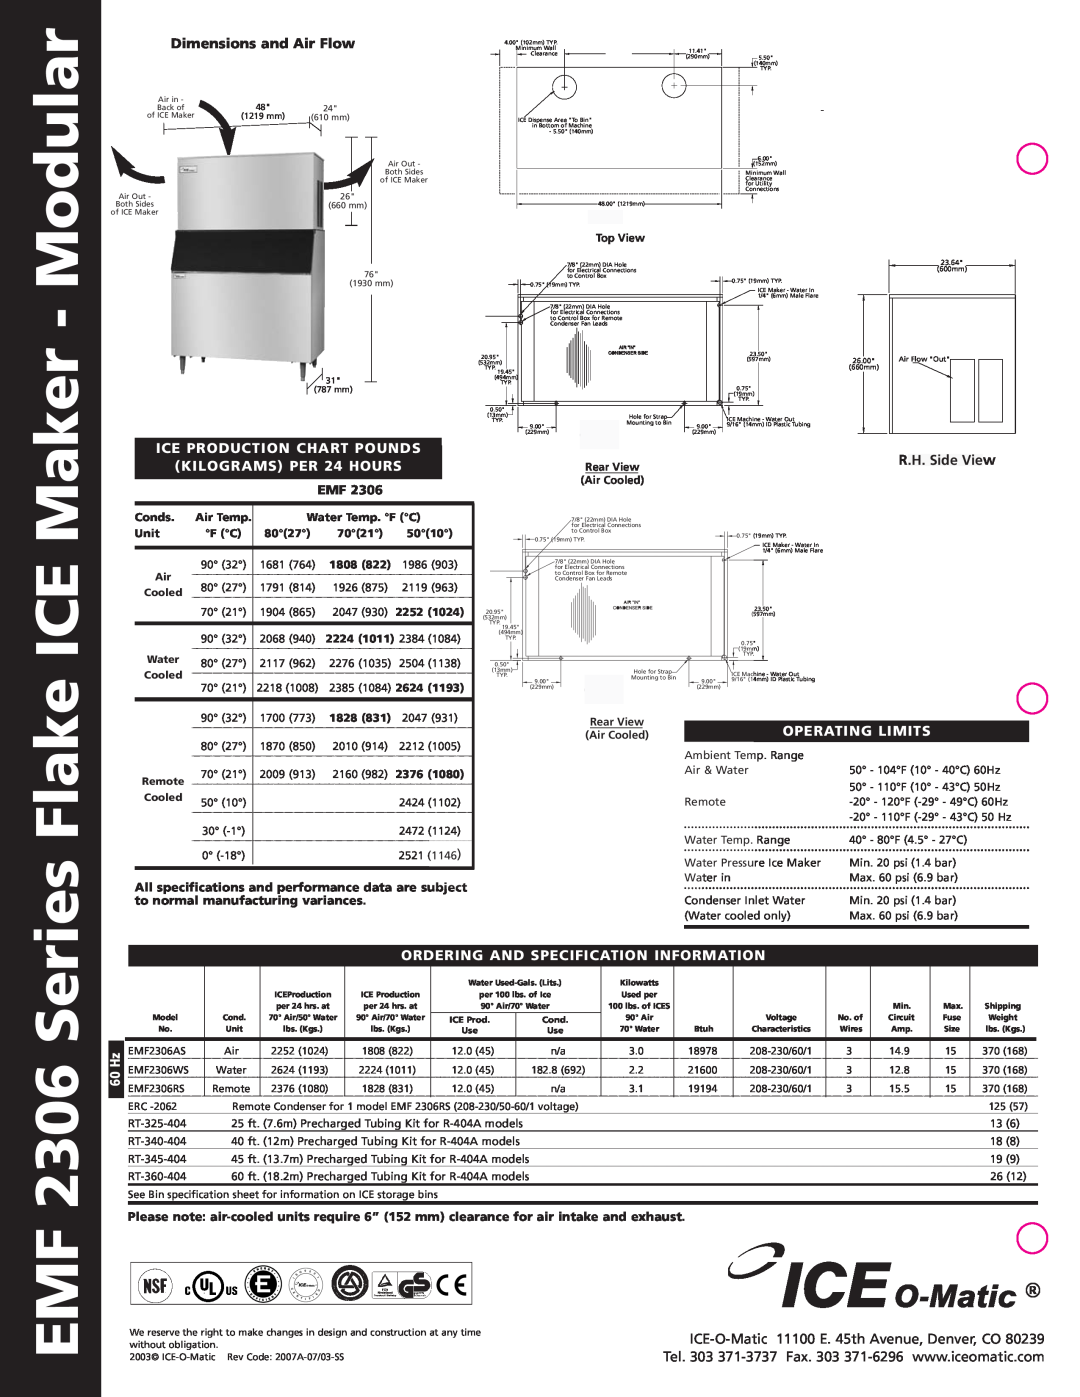 Ice-O-Matic Modular, EMF 2306 Series Flake ICE Maker, Dimensions and Air Flow, Ice Production Chart Pounds, Information 